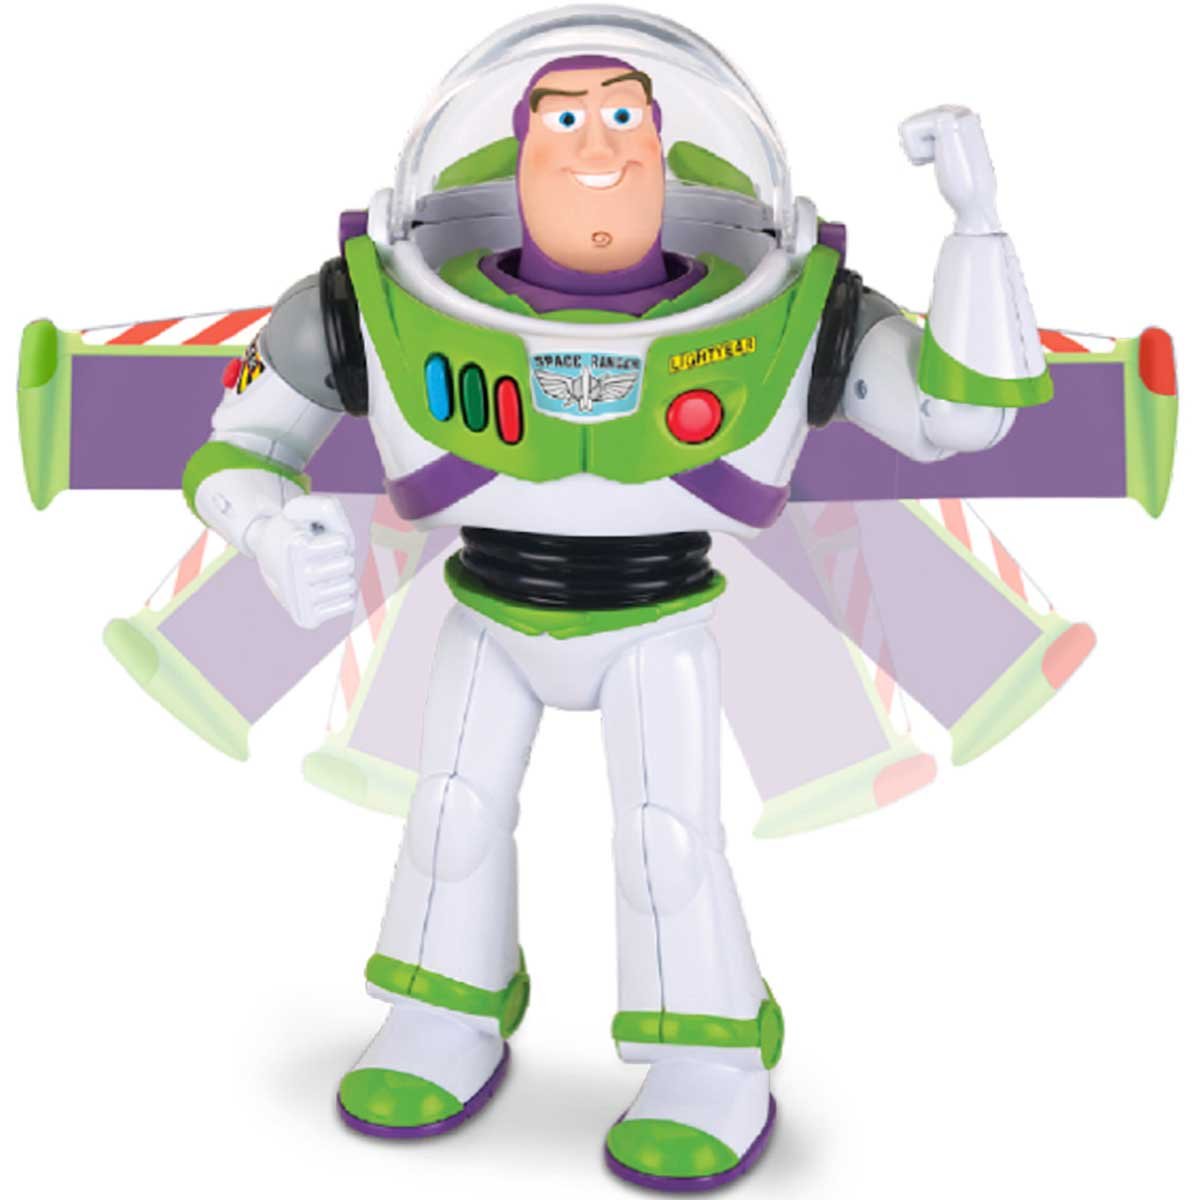 Toy Story 4 Buzz Lightyear Deluxe Toy Plus